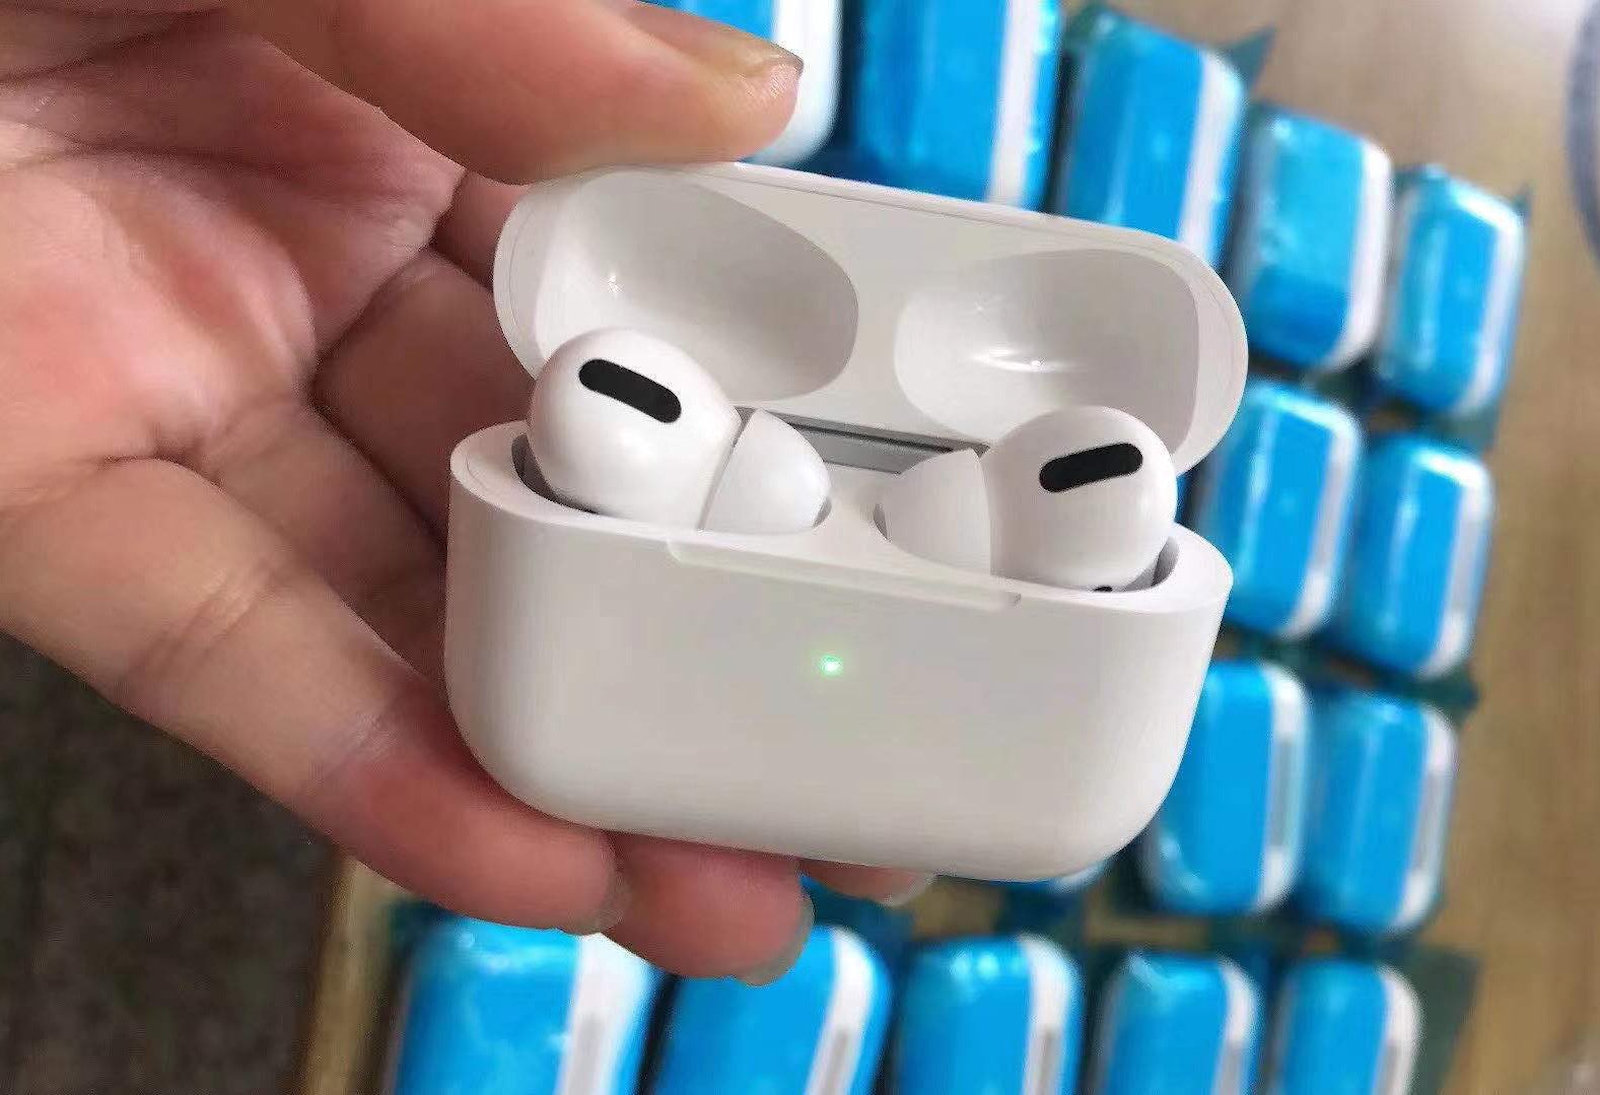 Airpods 3 1. Наушники Air pods Pro 2. Air pods Pro 1. Наушники Apple аирподс 3. Клон AIRPODS 2.